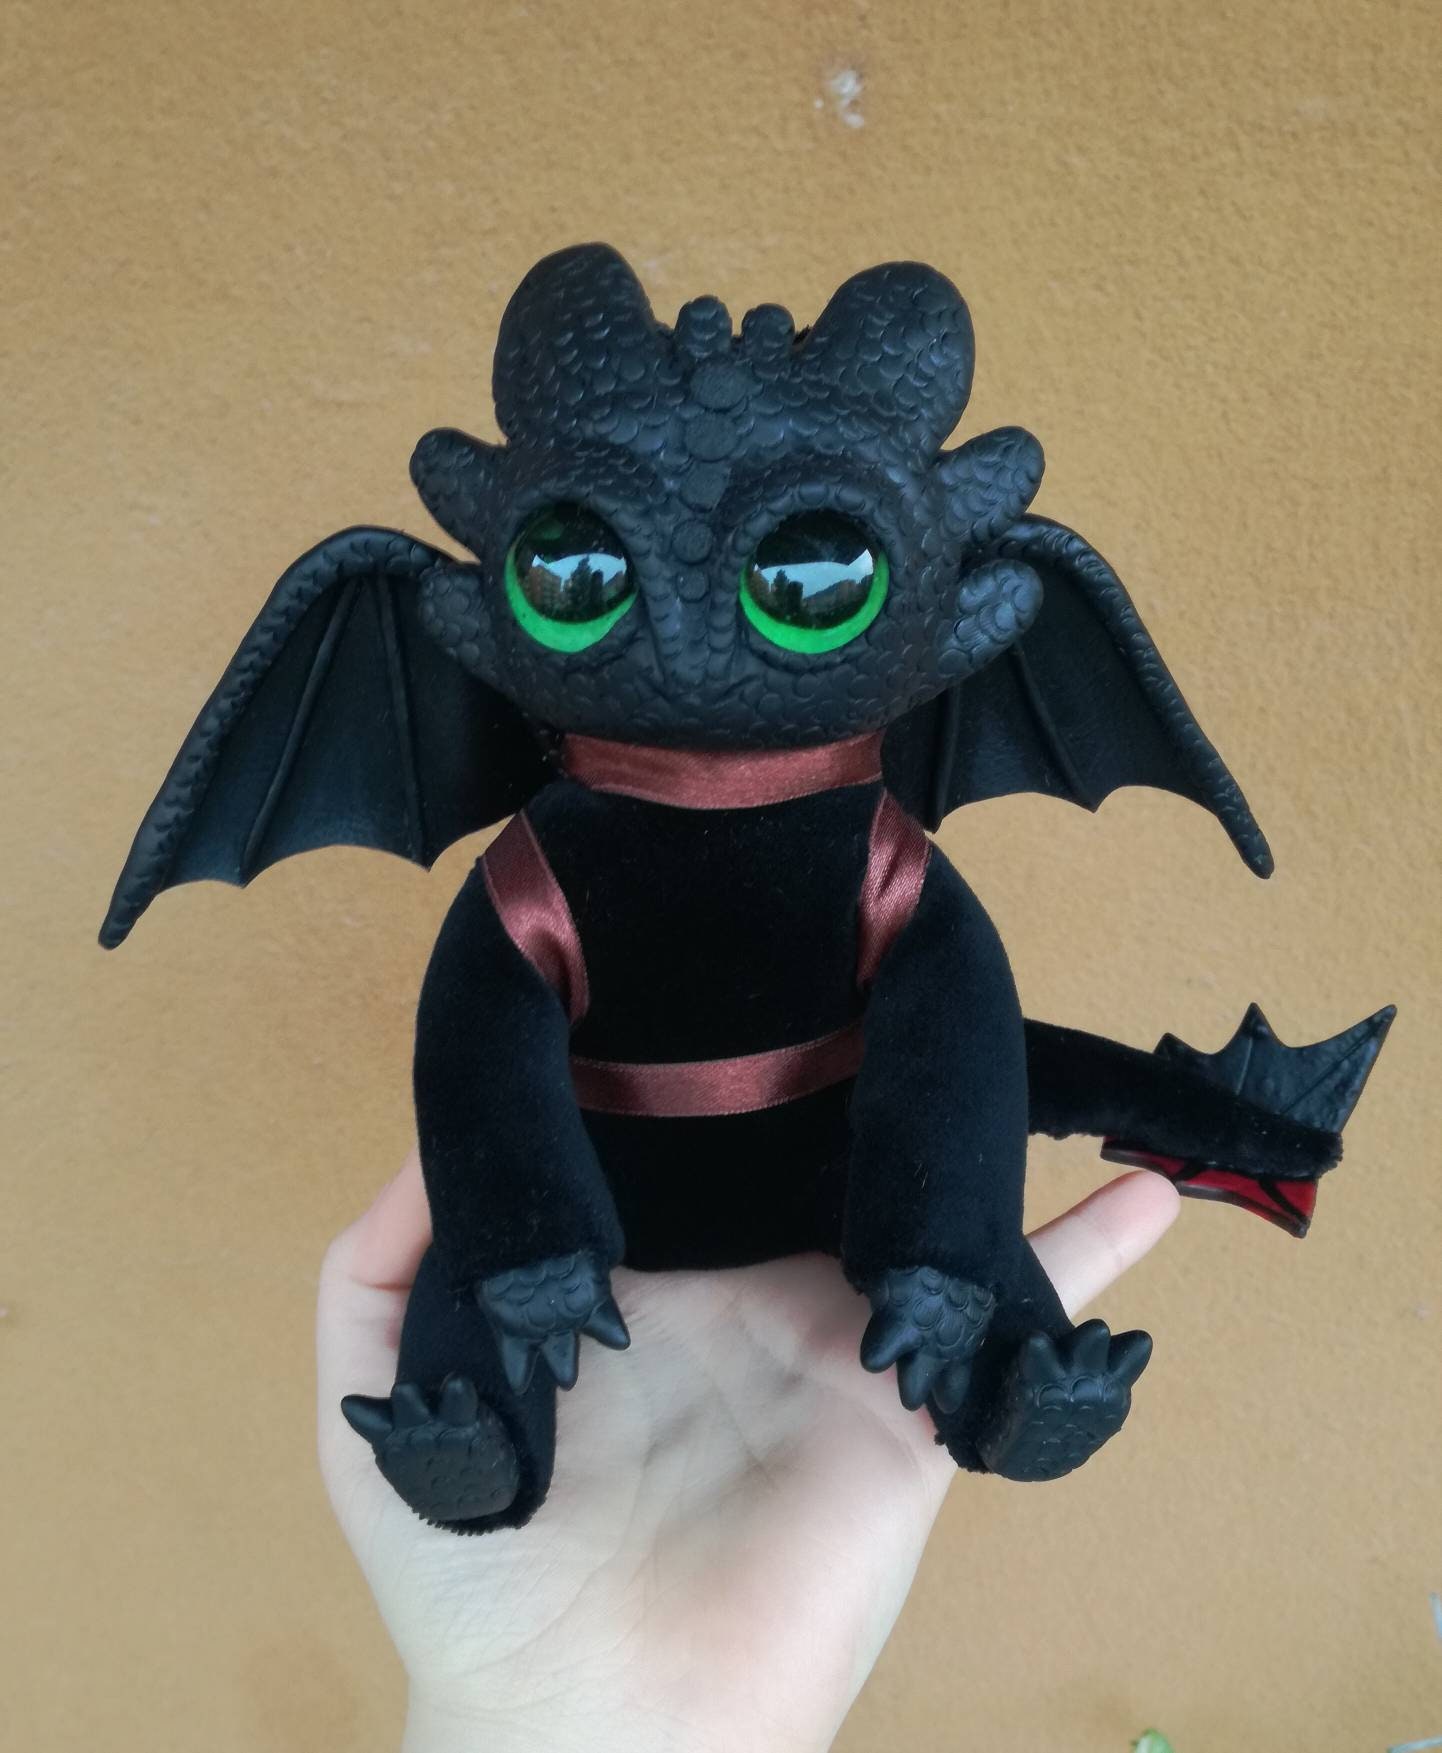 How to Train your Dragon 2 Plush Soft Toy Approx 9" 7392 